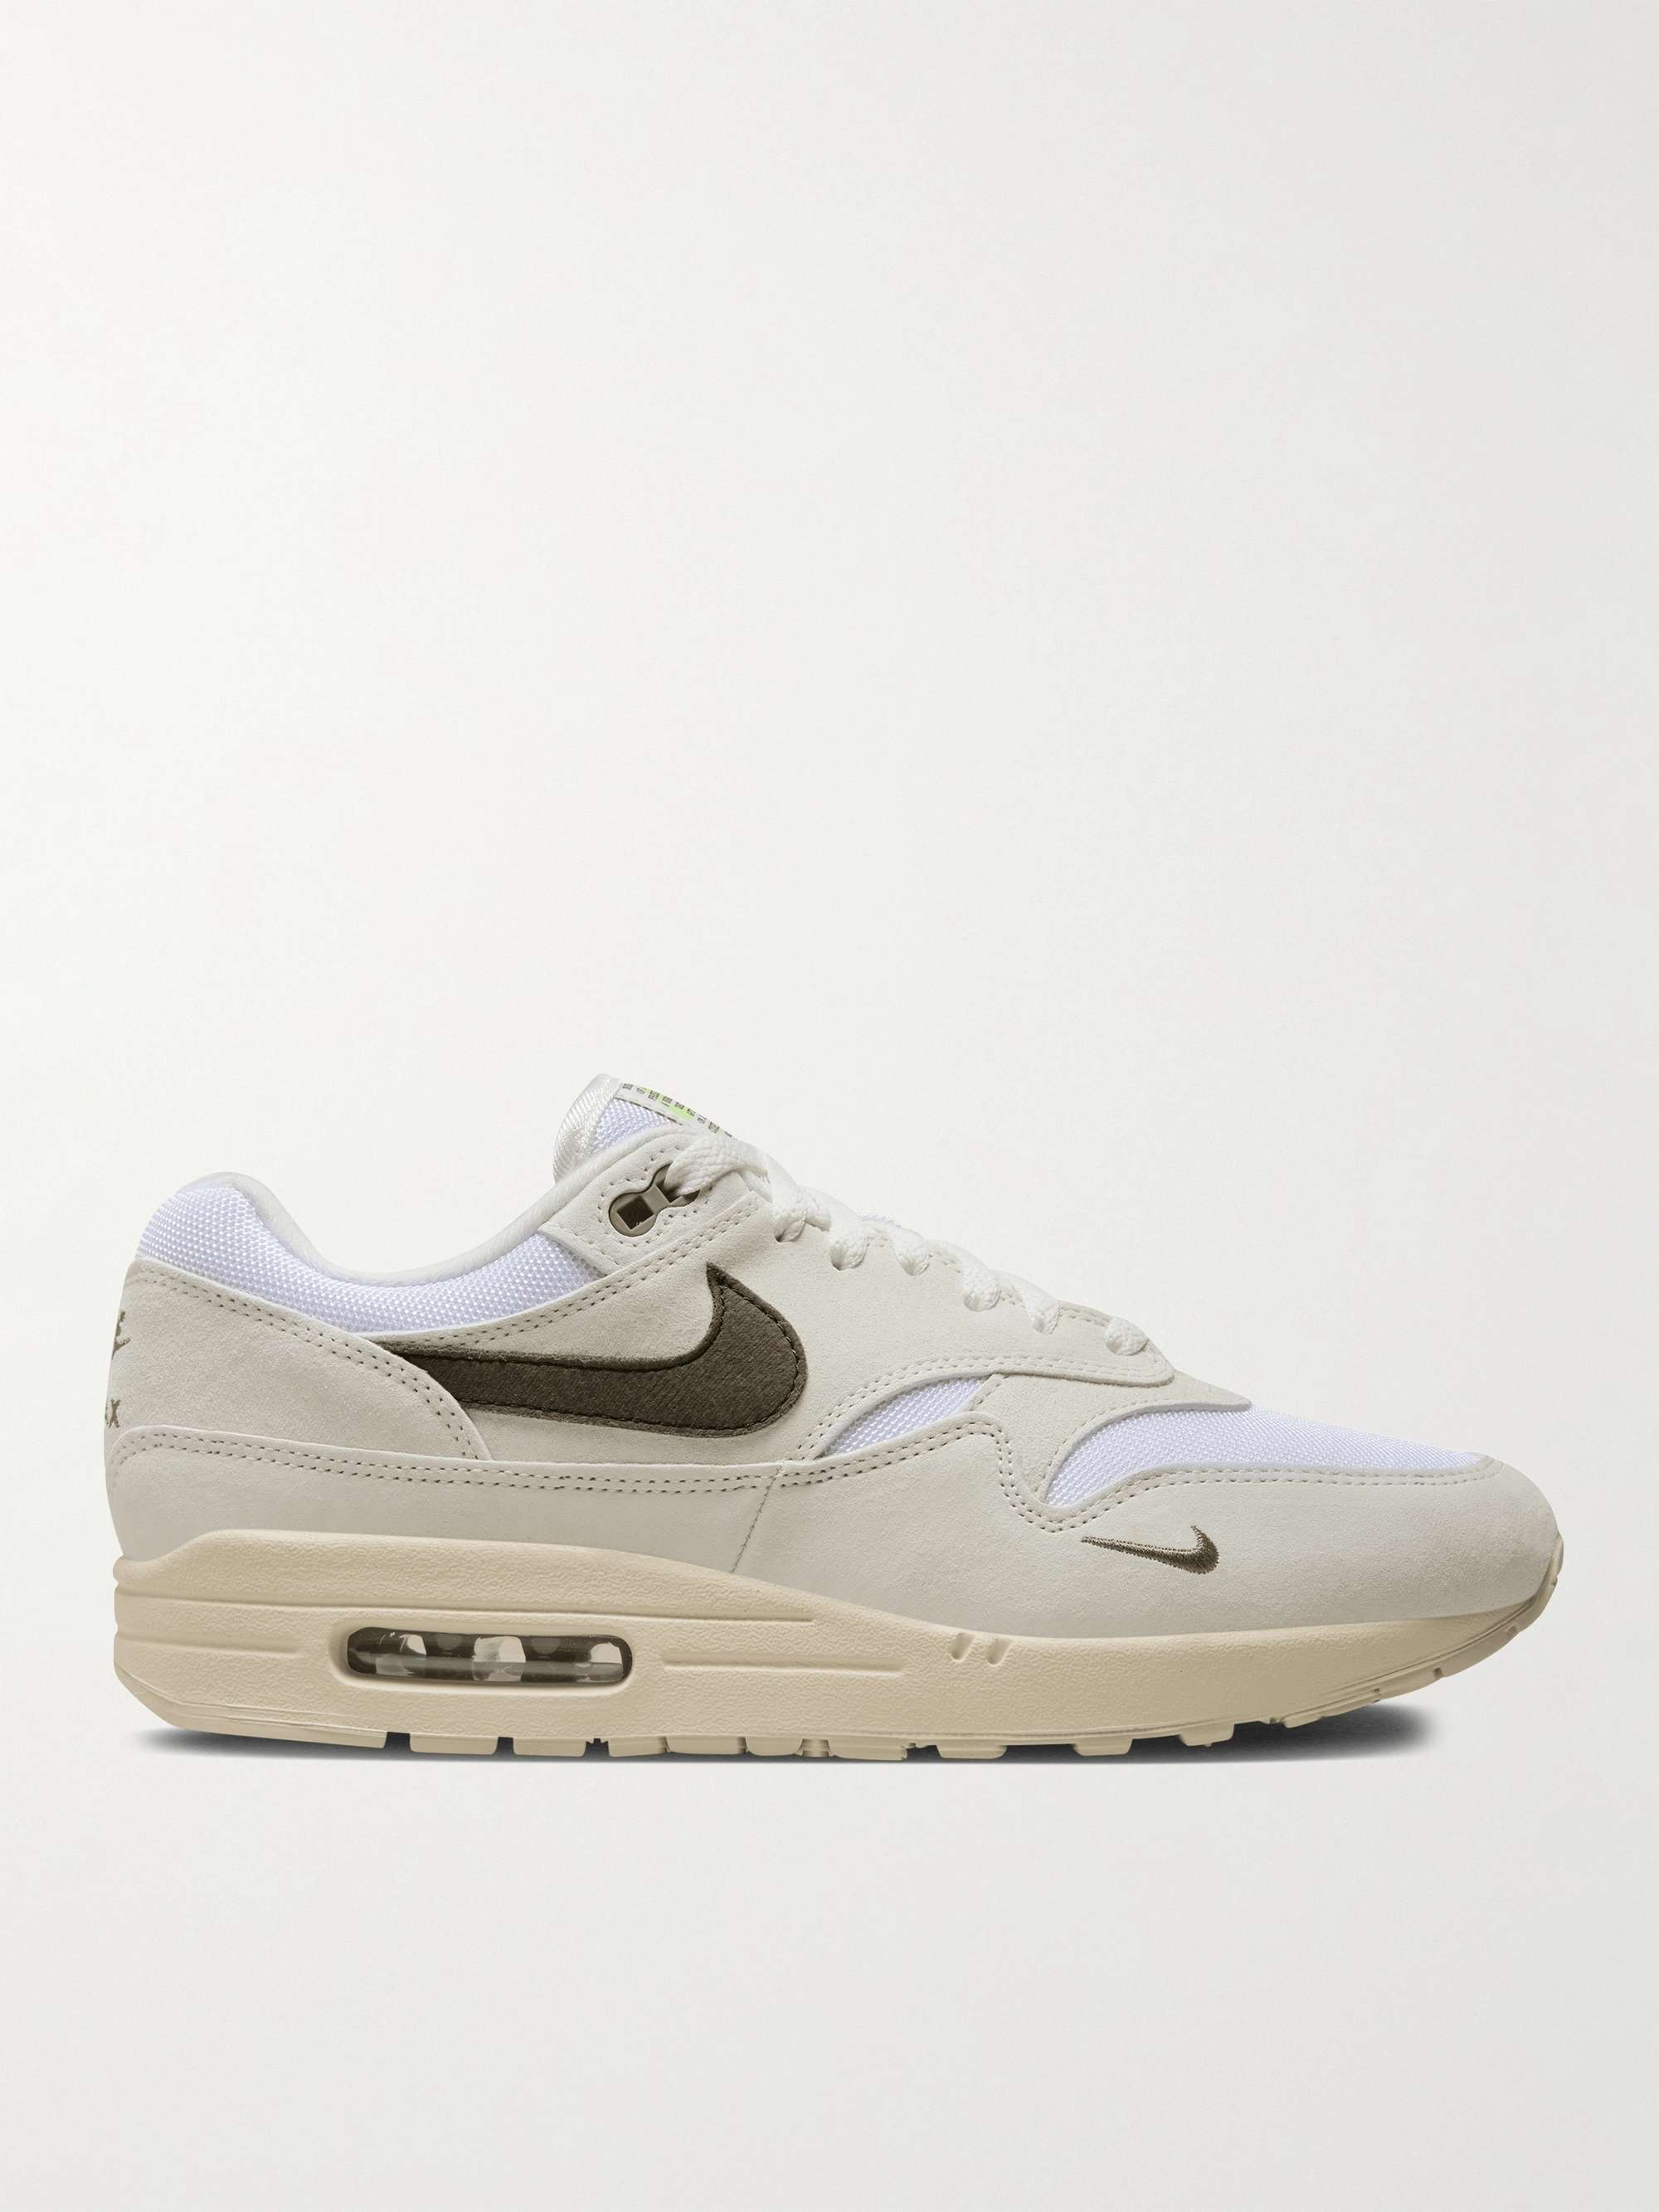 Air Max 1 Mesh, Felt and Suede Sneakers | NIKE | MR PORTER